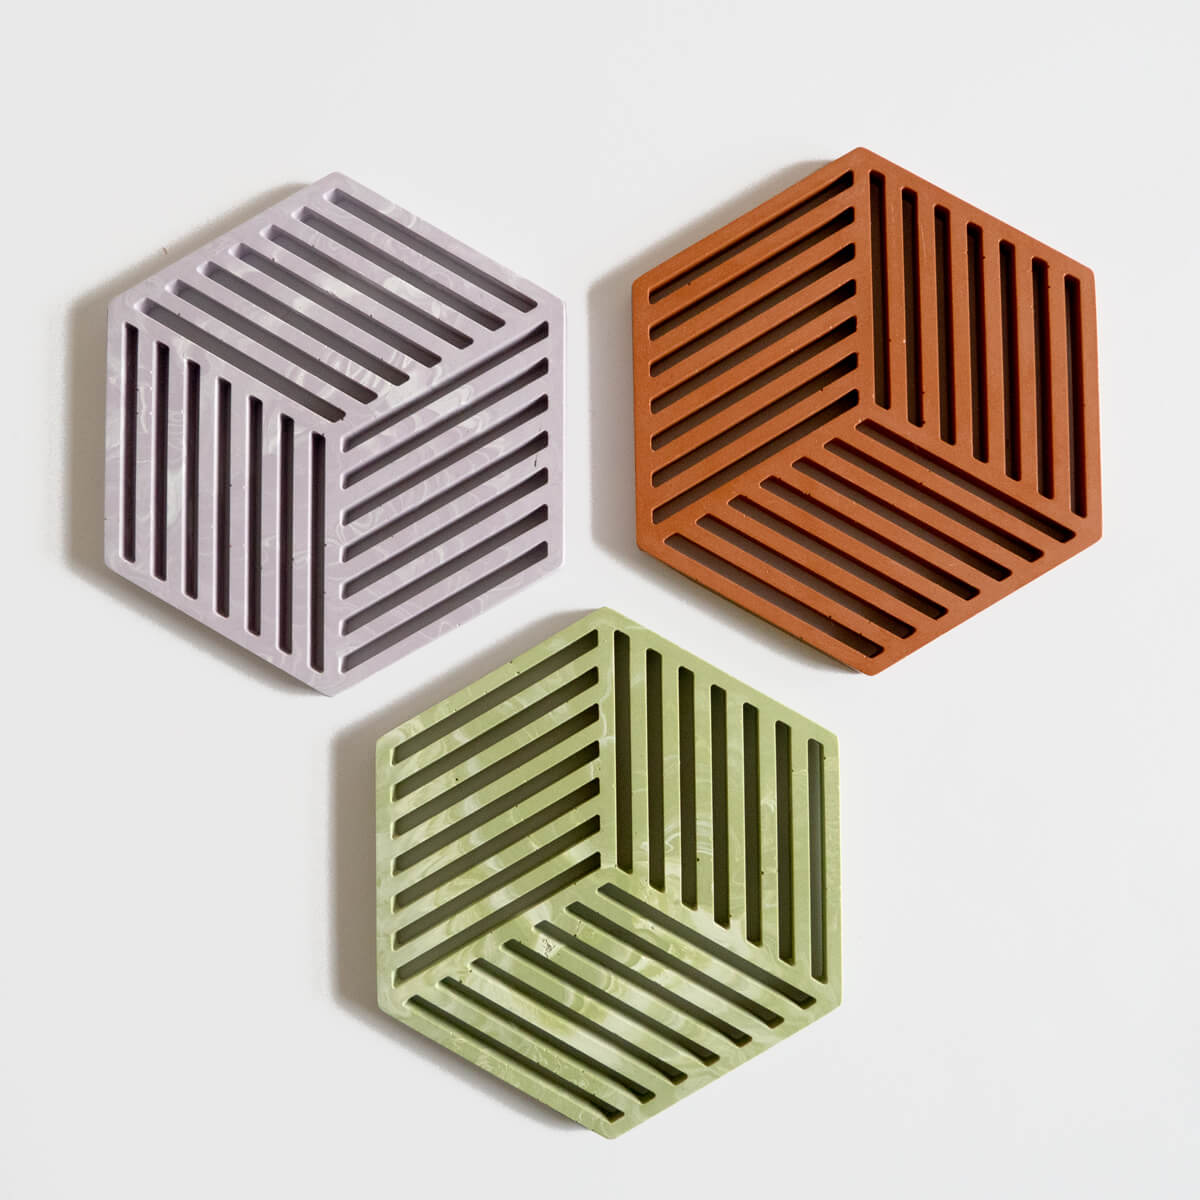 A group of 3 hexagonal jesmonite trivets in lilac, sage and terracotta handmade by Klndra for Curious Makers.